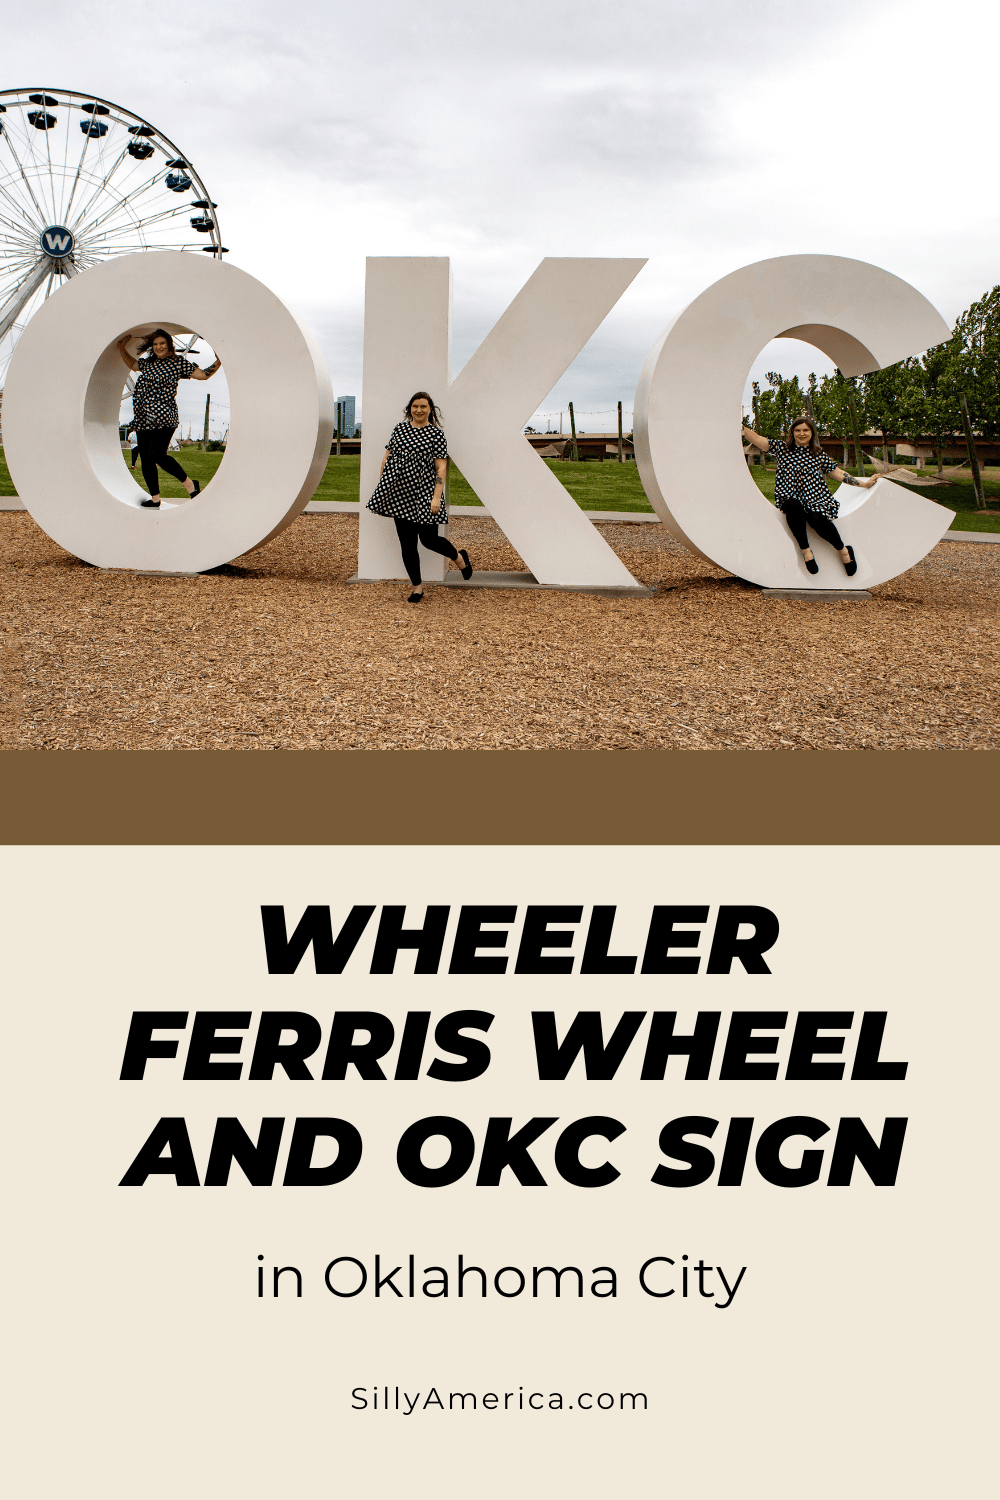 Come around and take a spin on this Oklahoma City attraction: the Wheeler Ferris Wheel and big OKC Sign. Visit this Oklahoma City roadside attraction on a Route 66 road trip. #OklahomaCity #FerrisWheel #Oklahoma #Route66 #RoadTrip #RoadsideAttraction #RoadsideAttractions